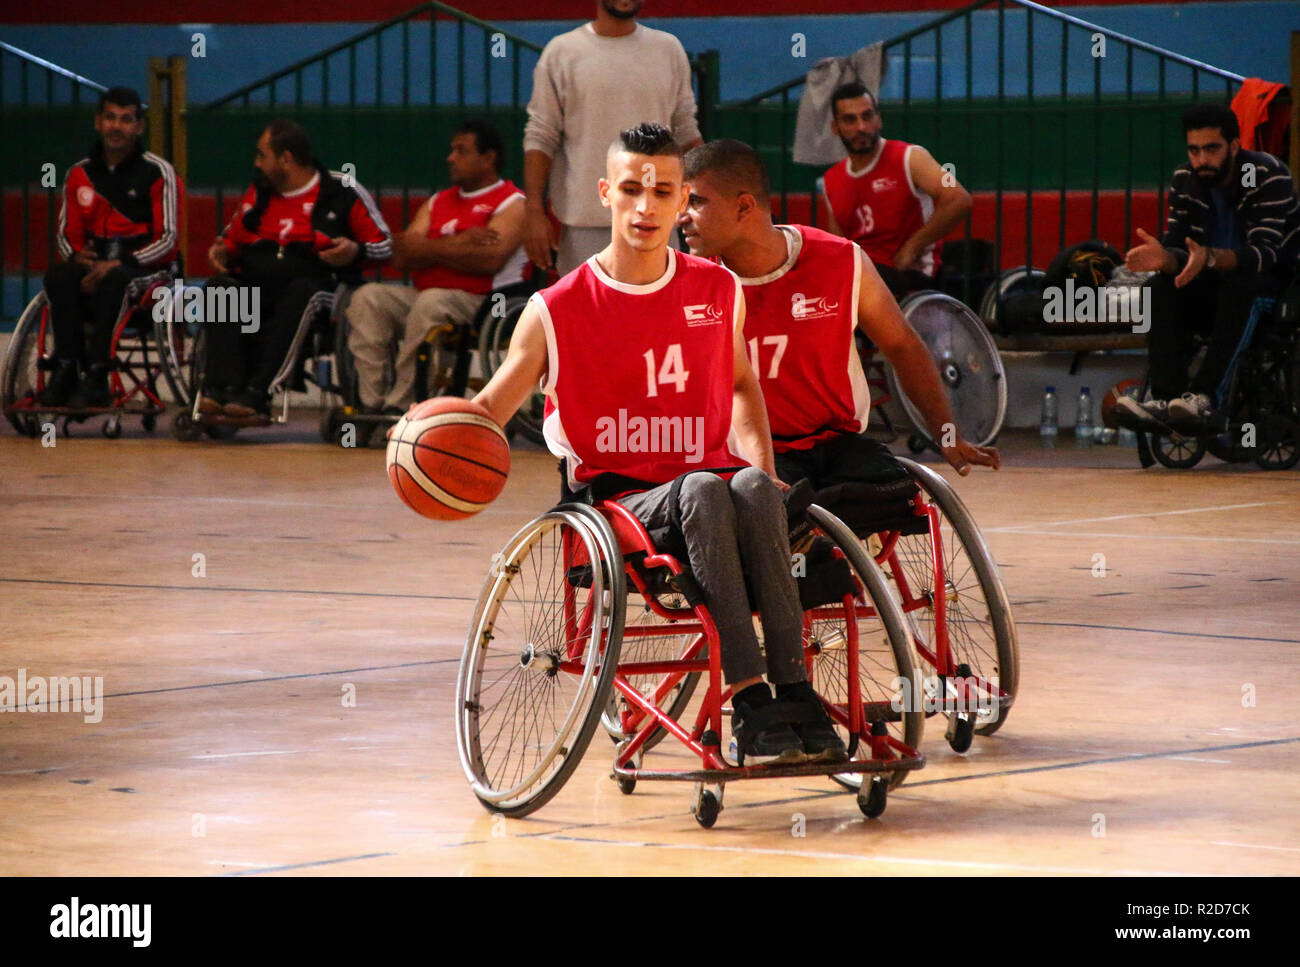 Al Hilal Sports Club player seen in action during the finals of the wheelchairs basketball championship at the Saad Sayel Hall in Gaza City. Stock Photo